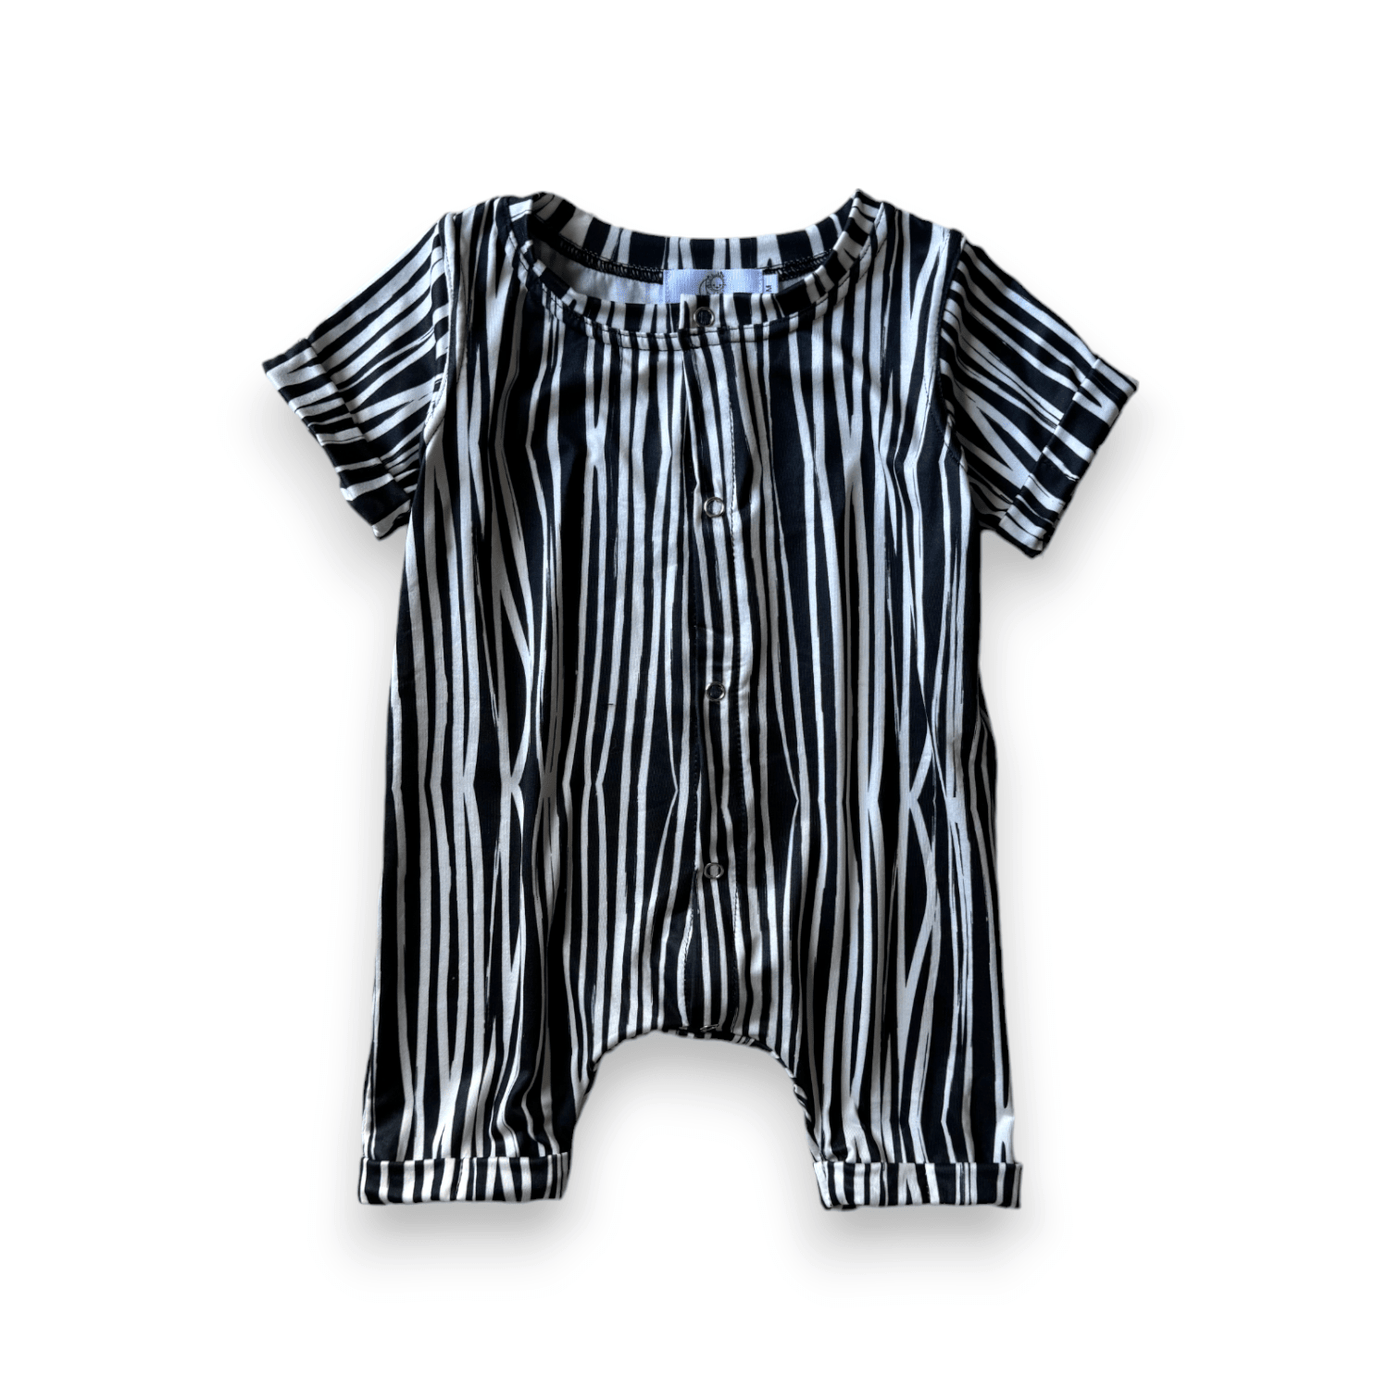 Best Day Ever Kids Baby One-Pieces Super Stripe Romper buy online boutique kids clothing